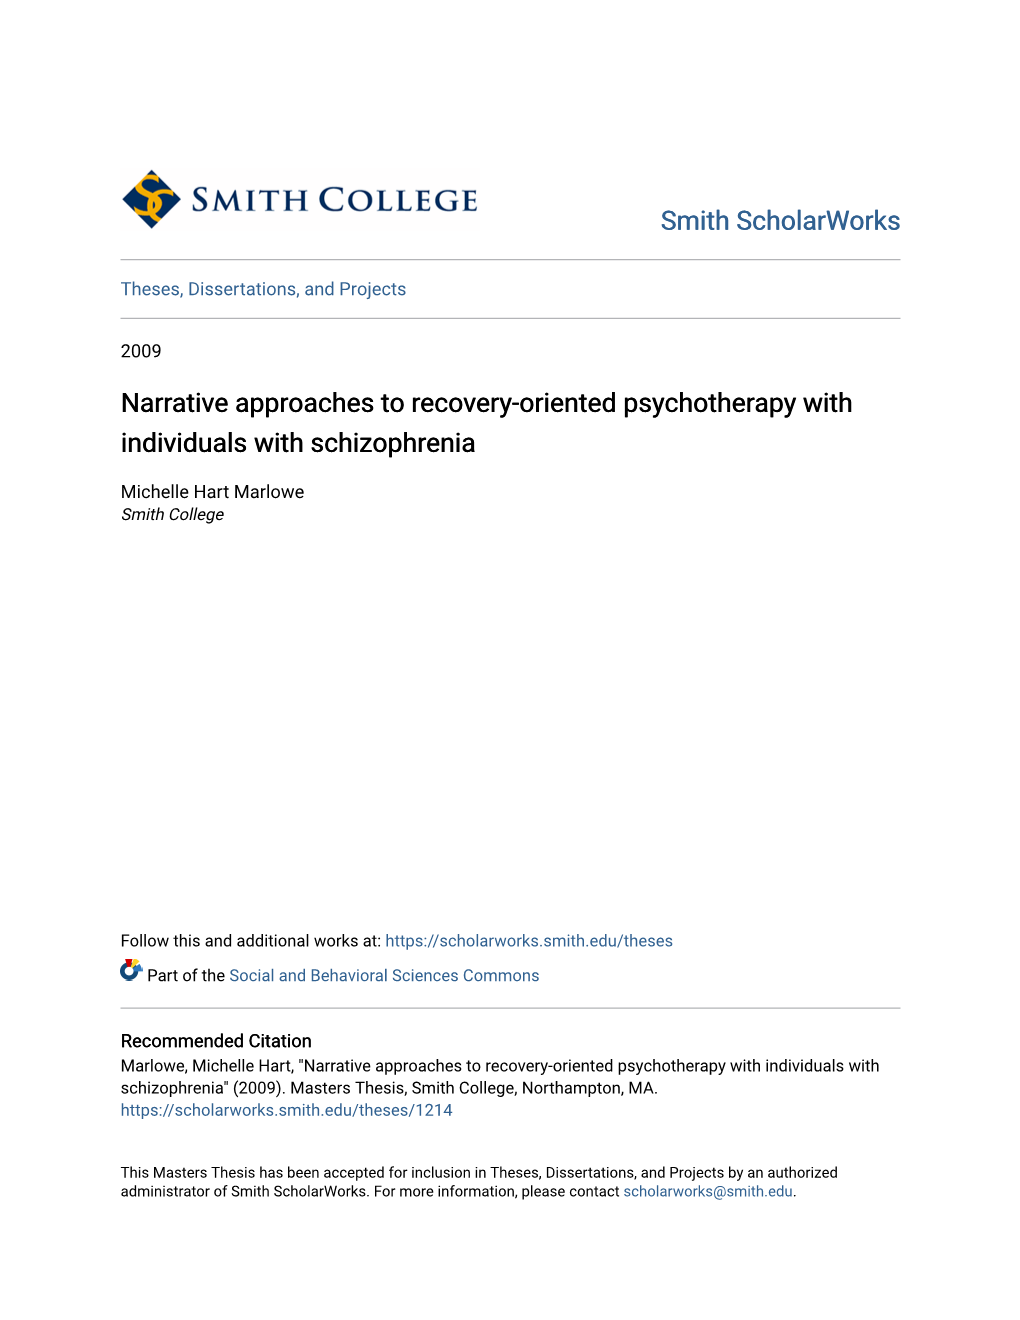 Narrative Approaches to Recovery-Oriented Psychotherapy with Individuals with Schizophrenia